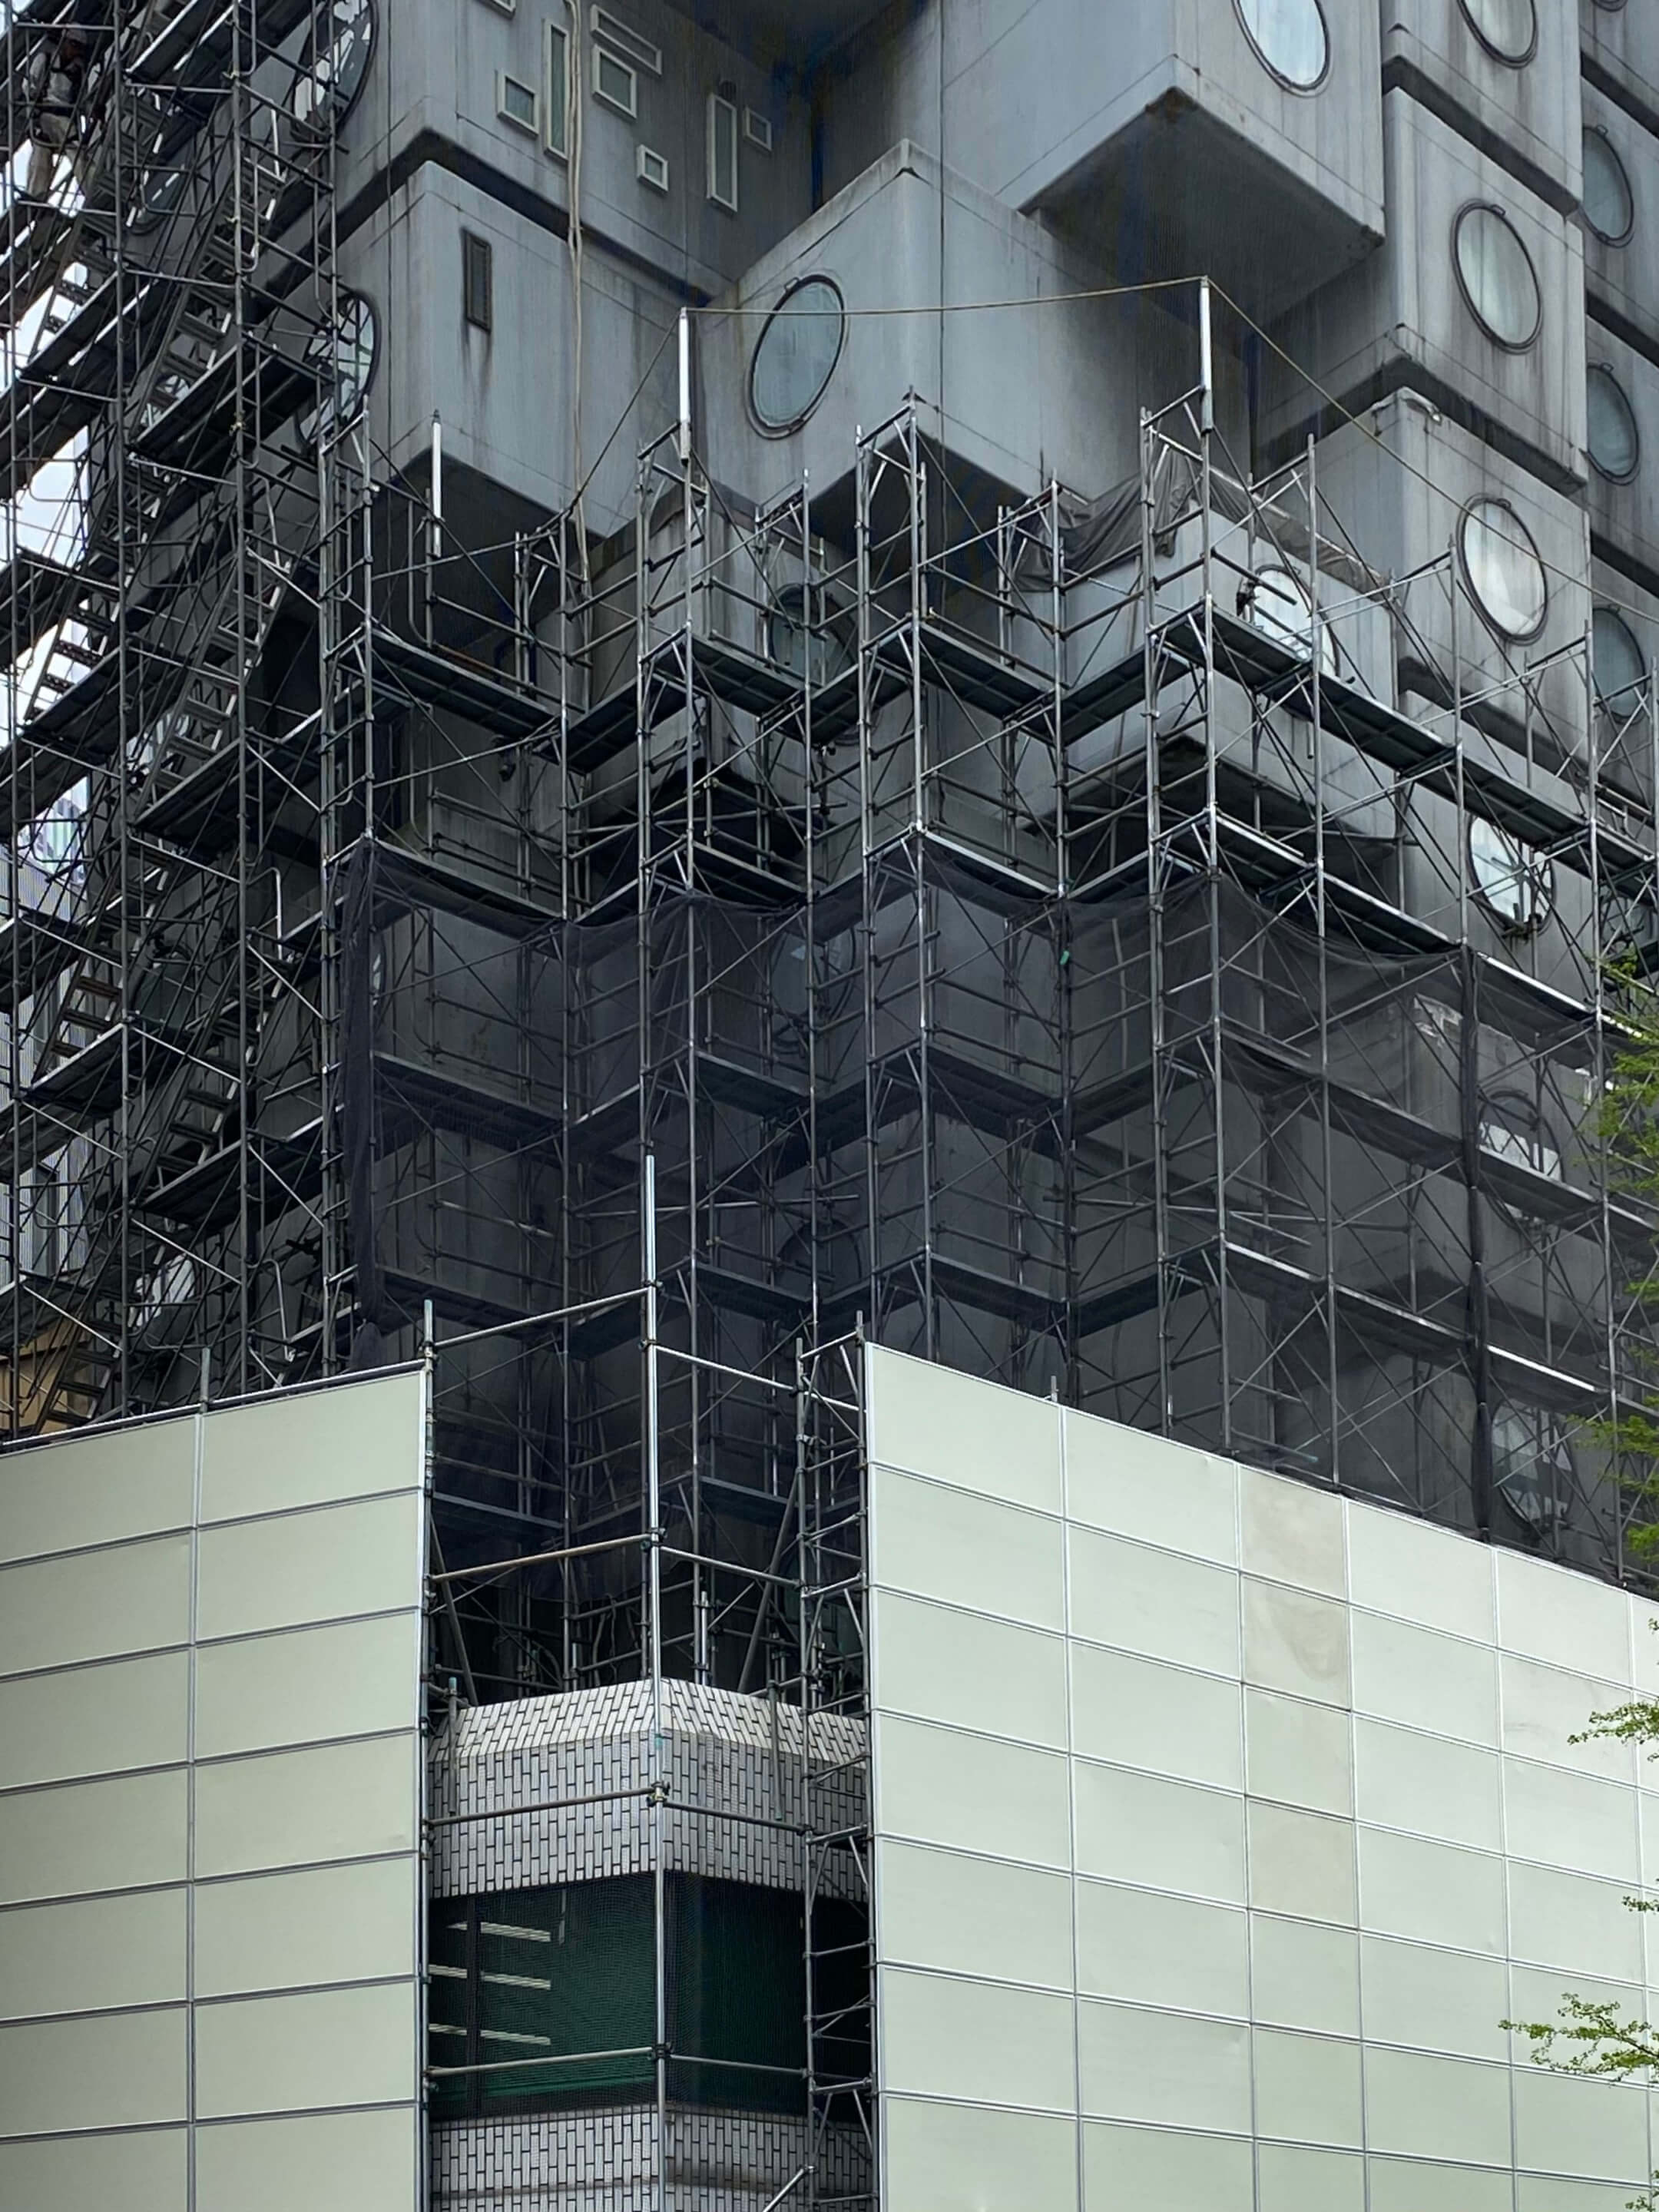 the nakagin capsule tower wrapped in scaffolding